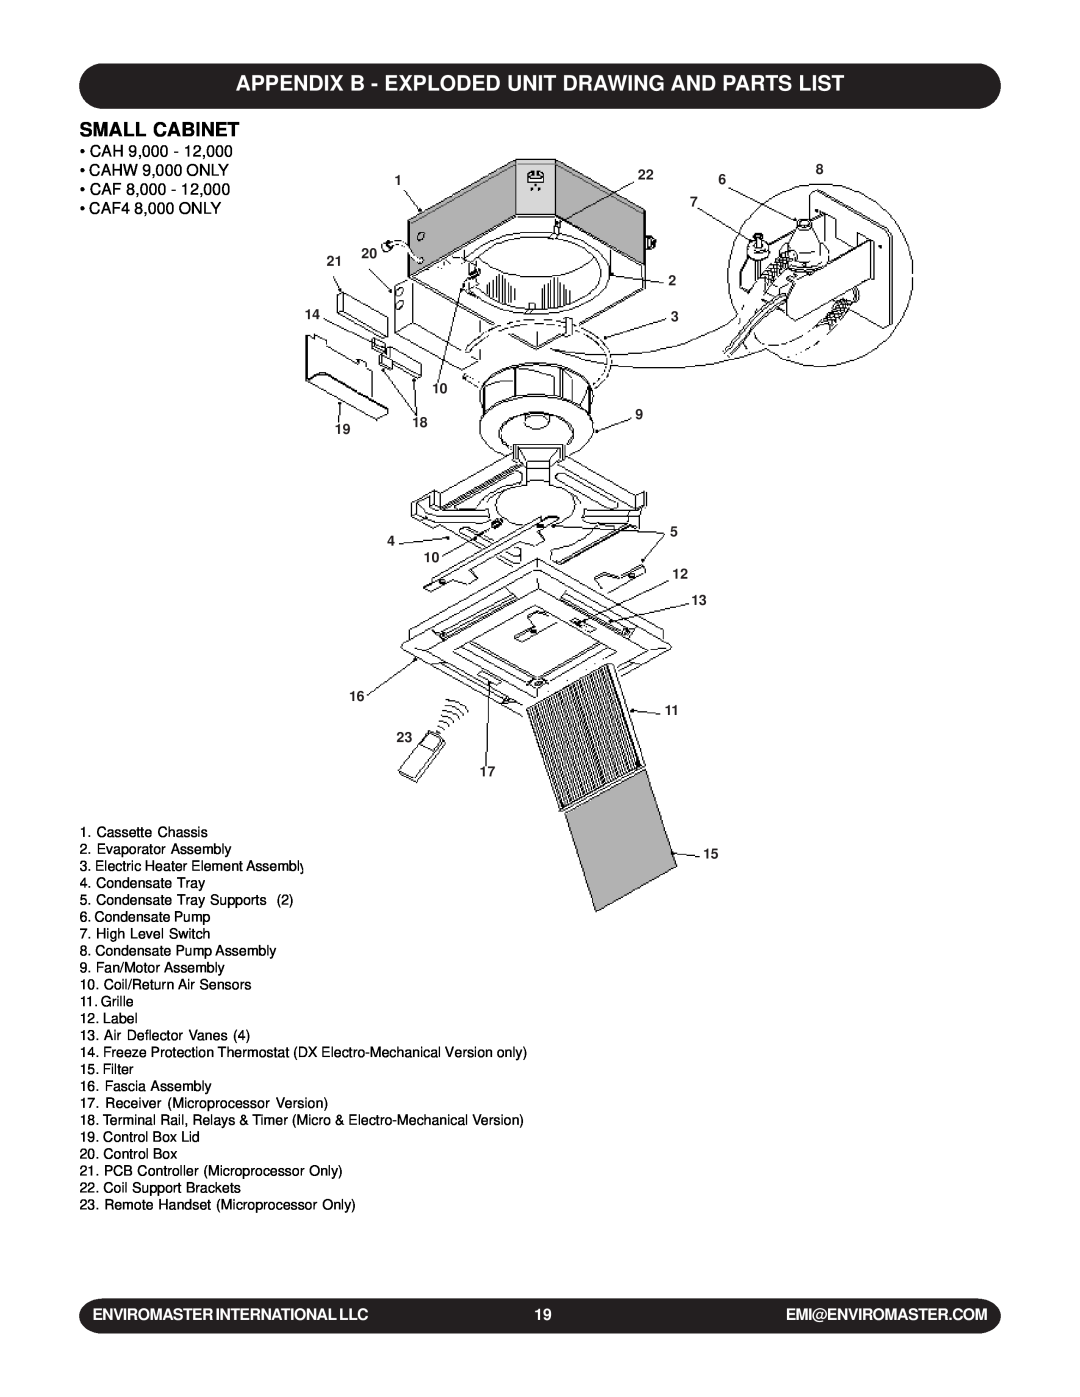 EMI WLCA Appendix B - Exploded Unit Drawing And Parts List, Small Cabinet, Enviromaster International Llc 